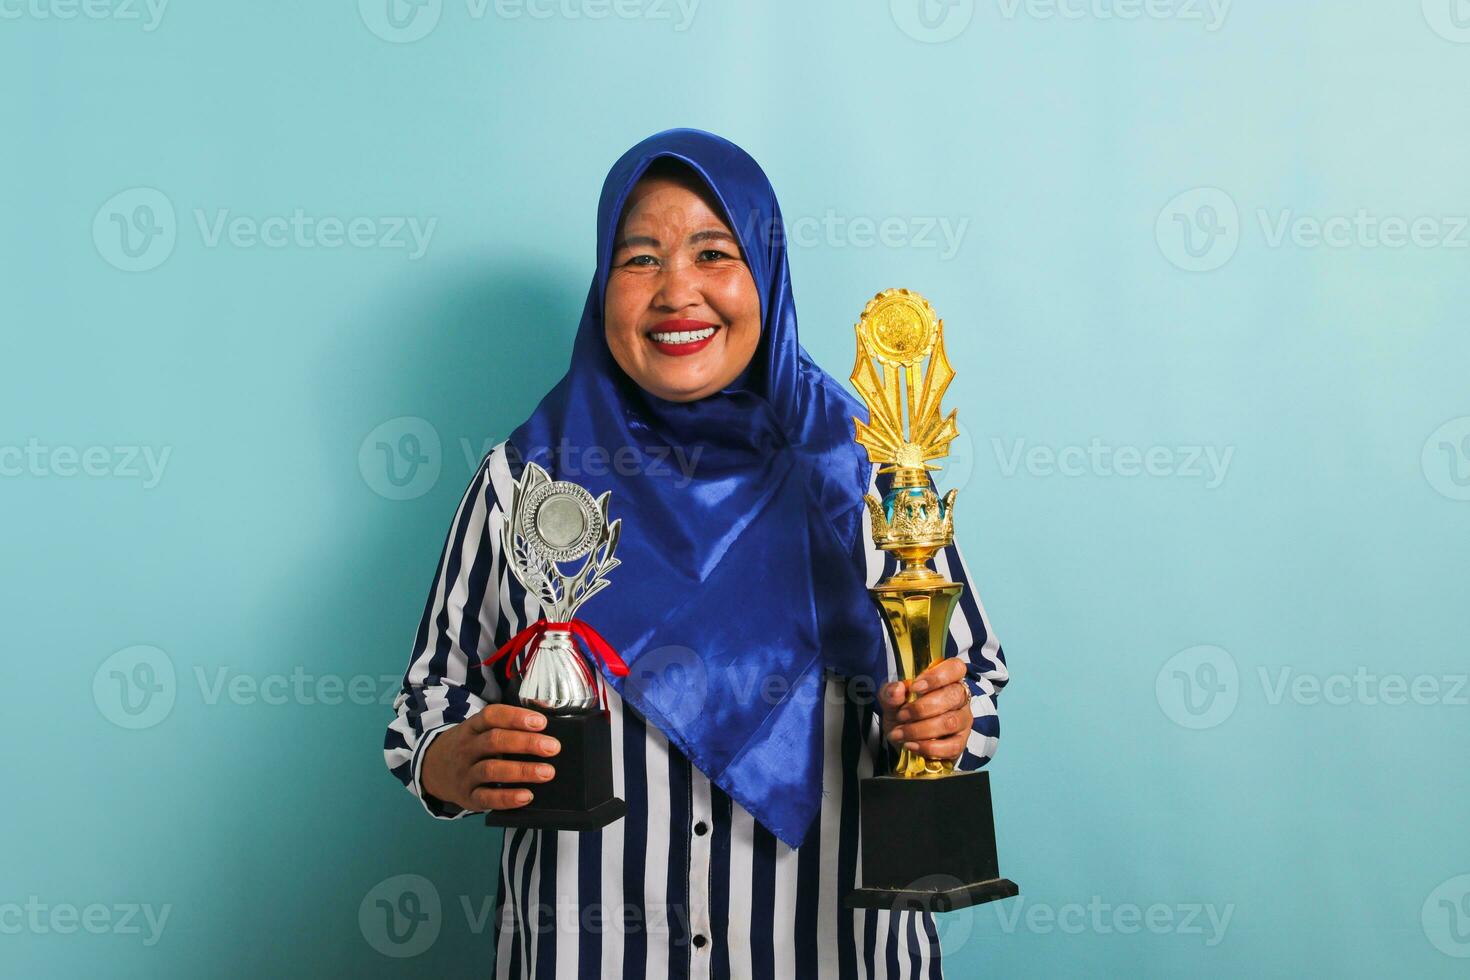 An excited middle-aged Asian businesswoman in a blue hijab and a striped shirt is holding a gold and silver trophy, celebrating her success and achievement. She is isolated on a blue background photo